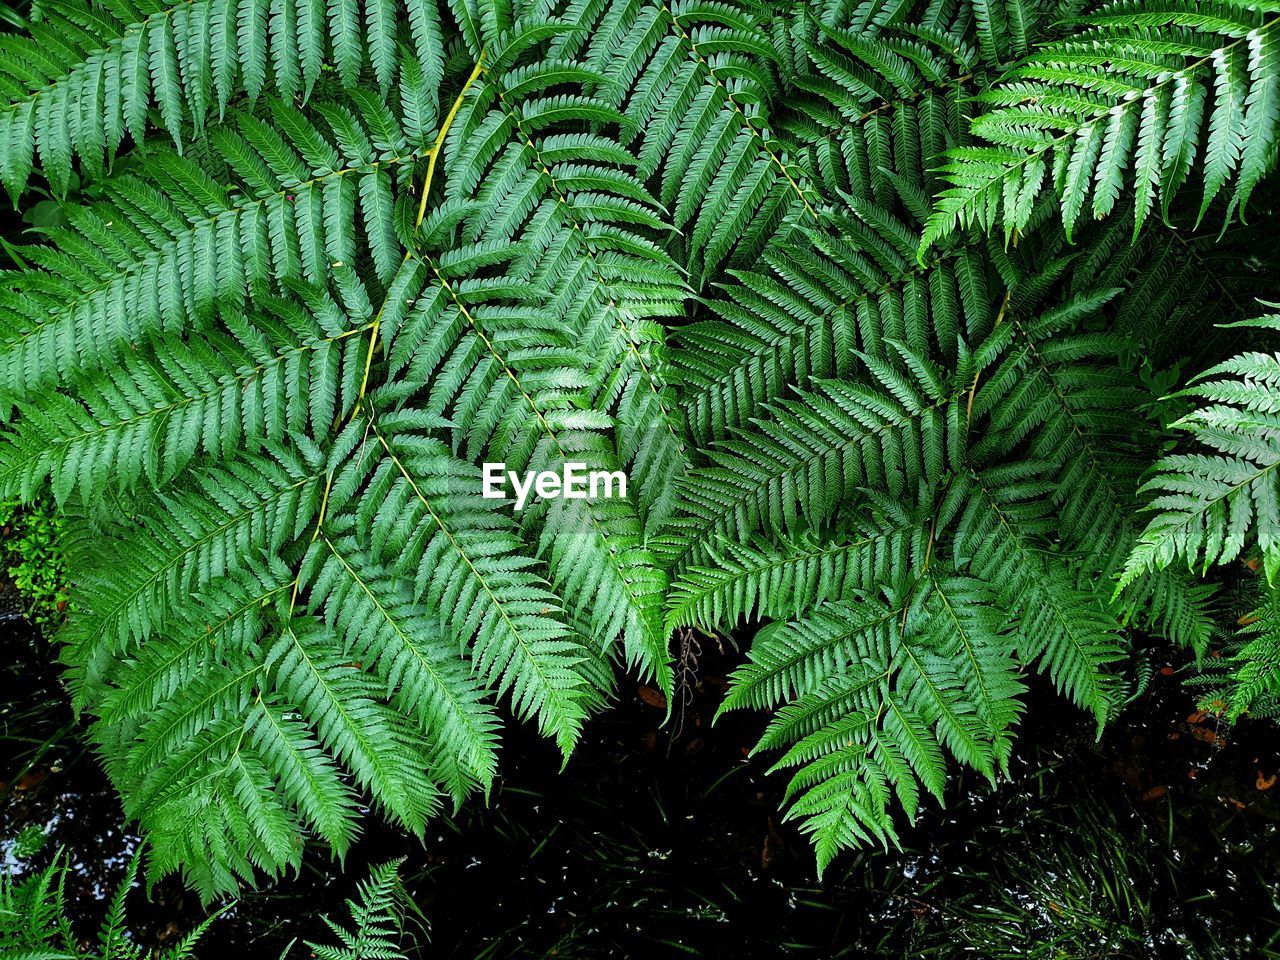 HIGH ANGLE VIEW OF FERN TREE